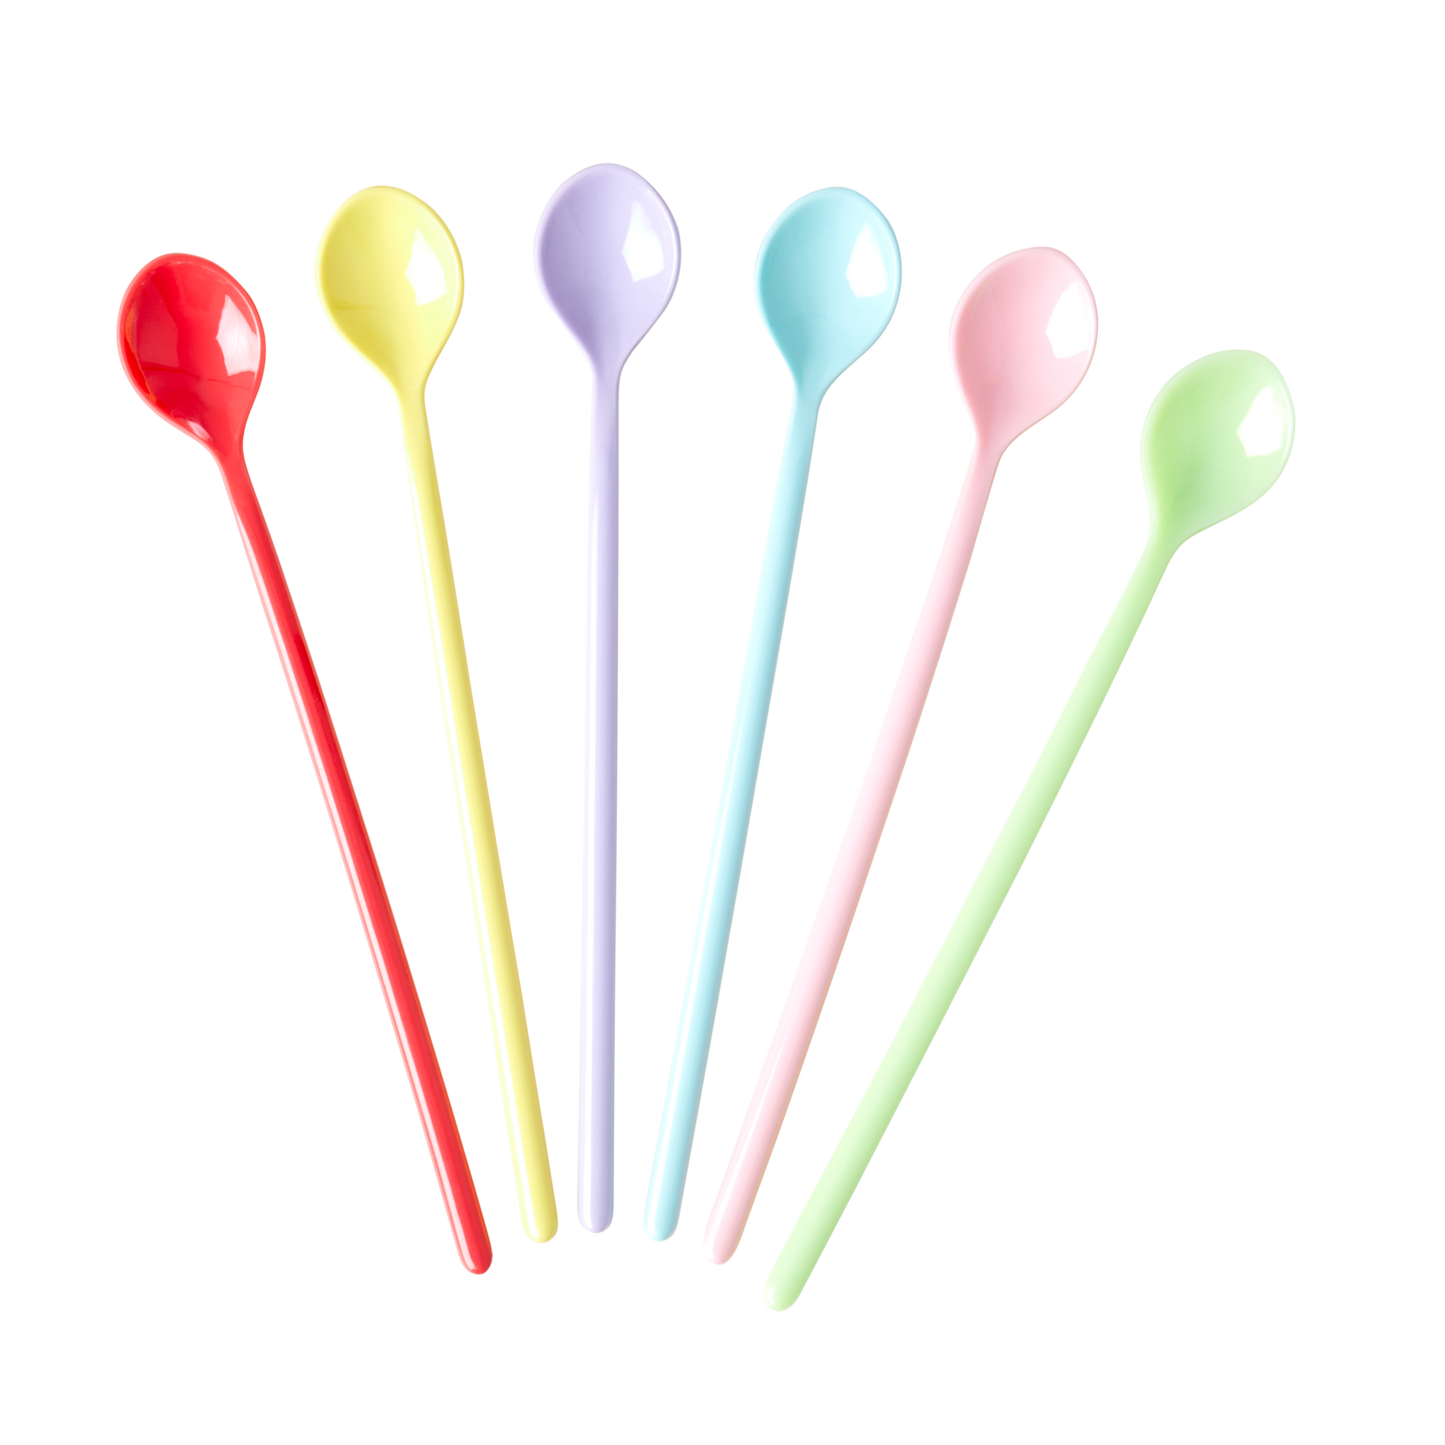 Melamine Latte Spoon in Assorted Yippie Yippie Yeah Colors - Bundle of 6 - Rice By Rice